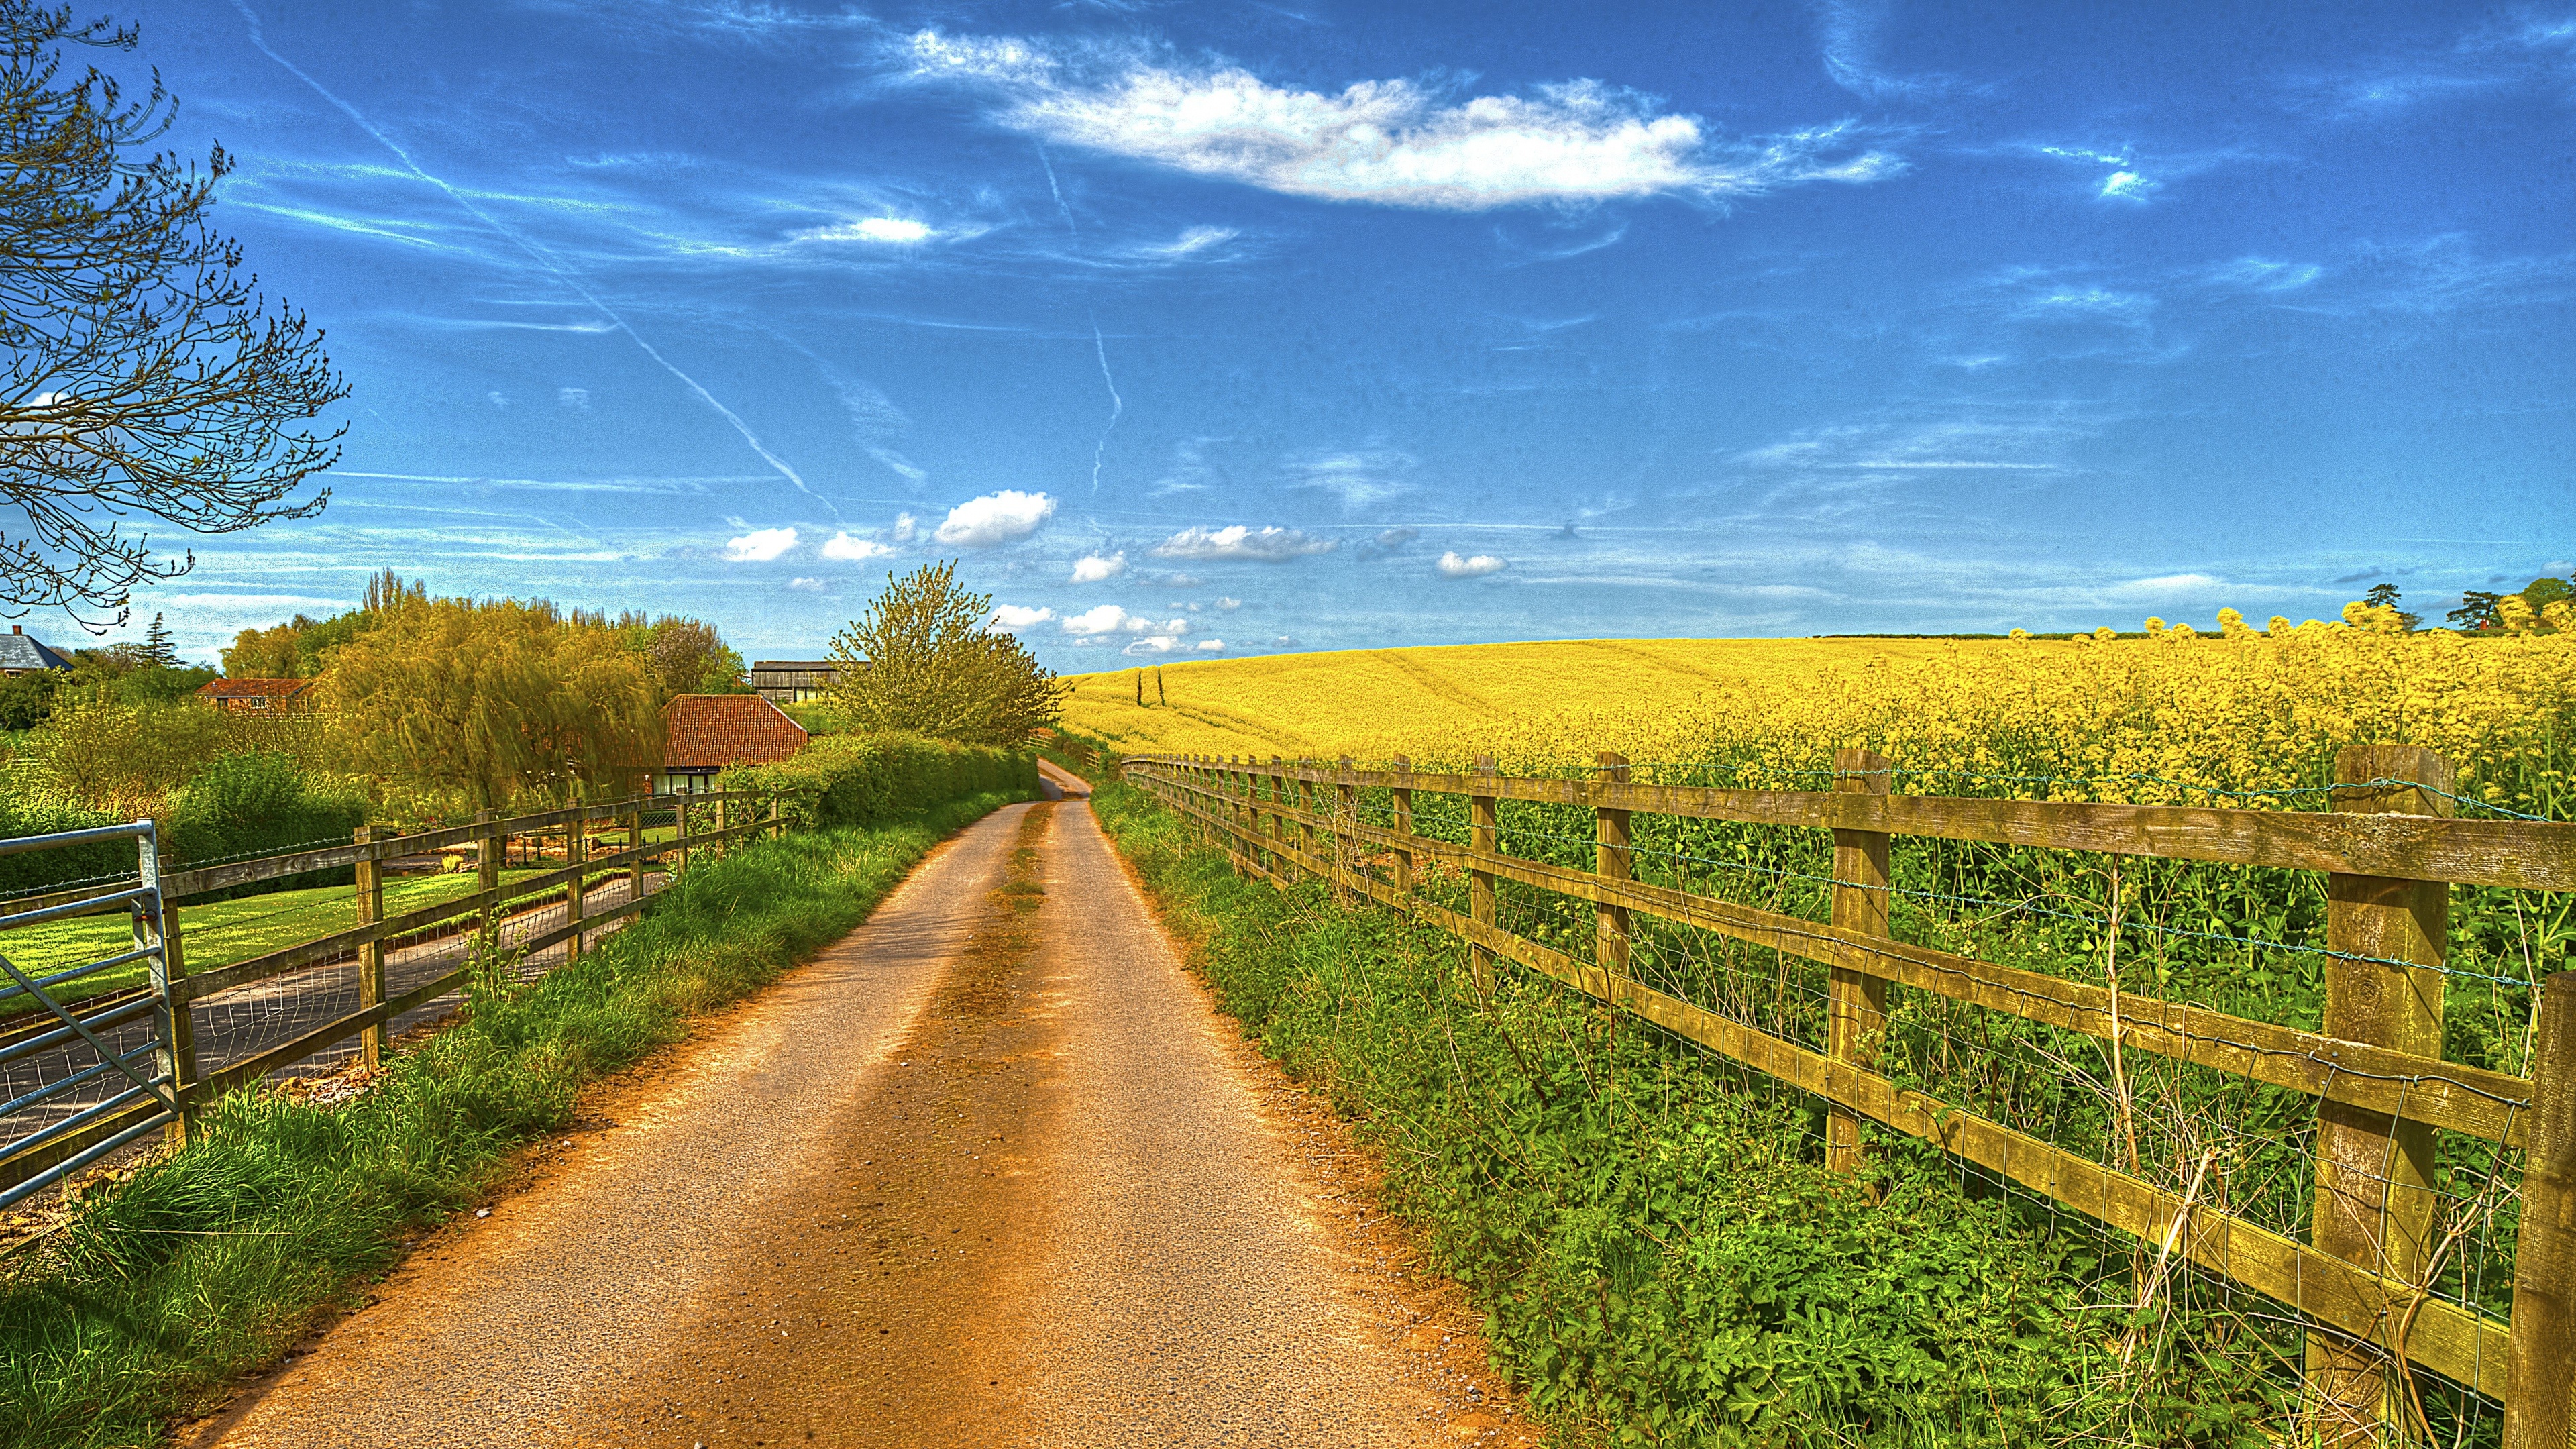 Country house, Road and field, Landscape beauty, Serenity captured, 3840x2160 4K Desktop